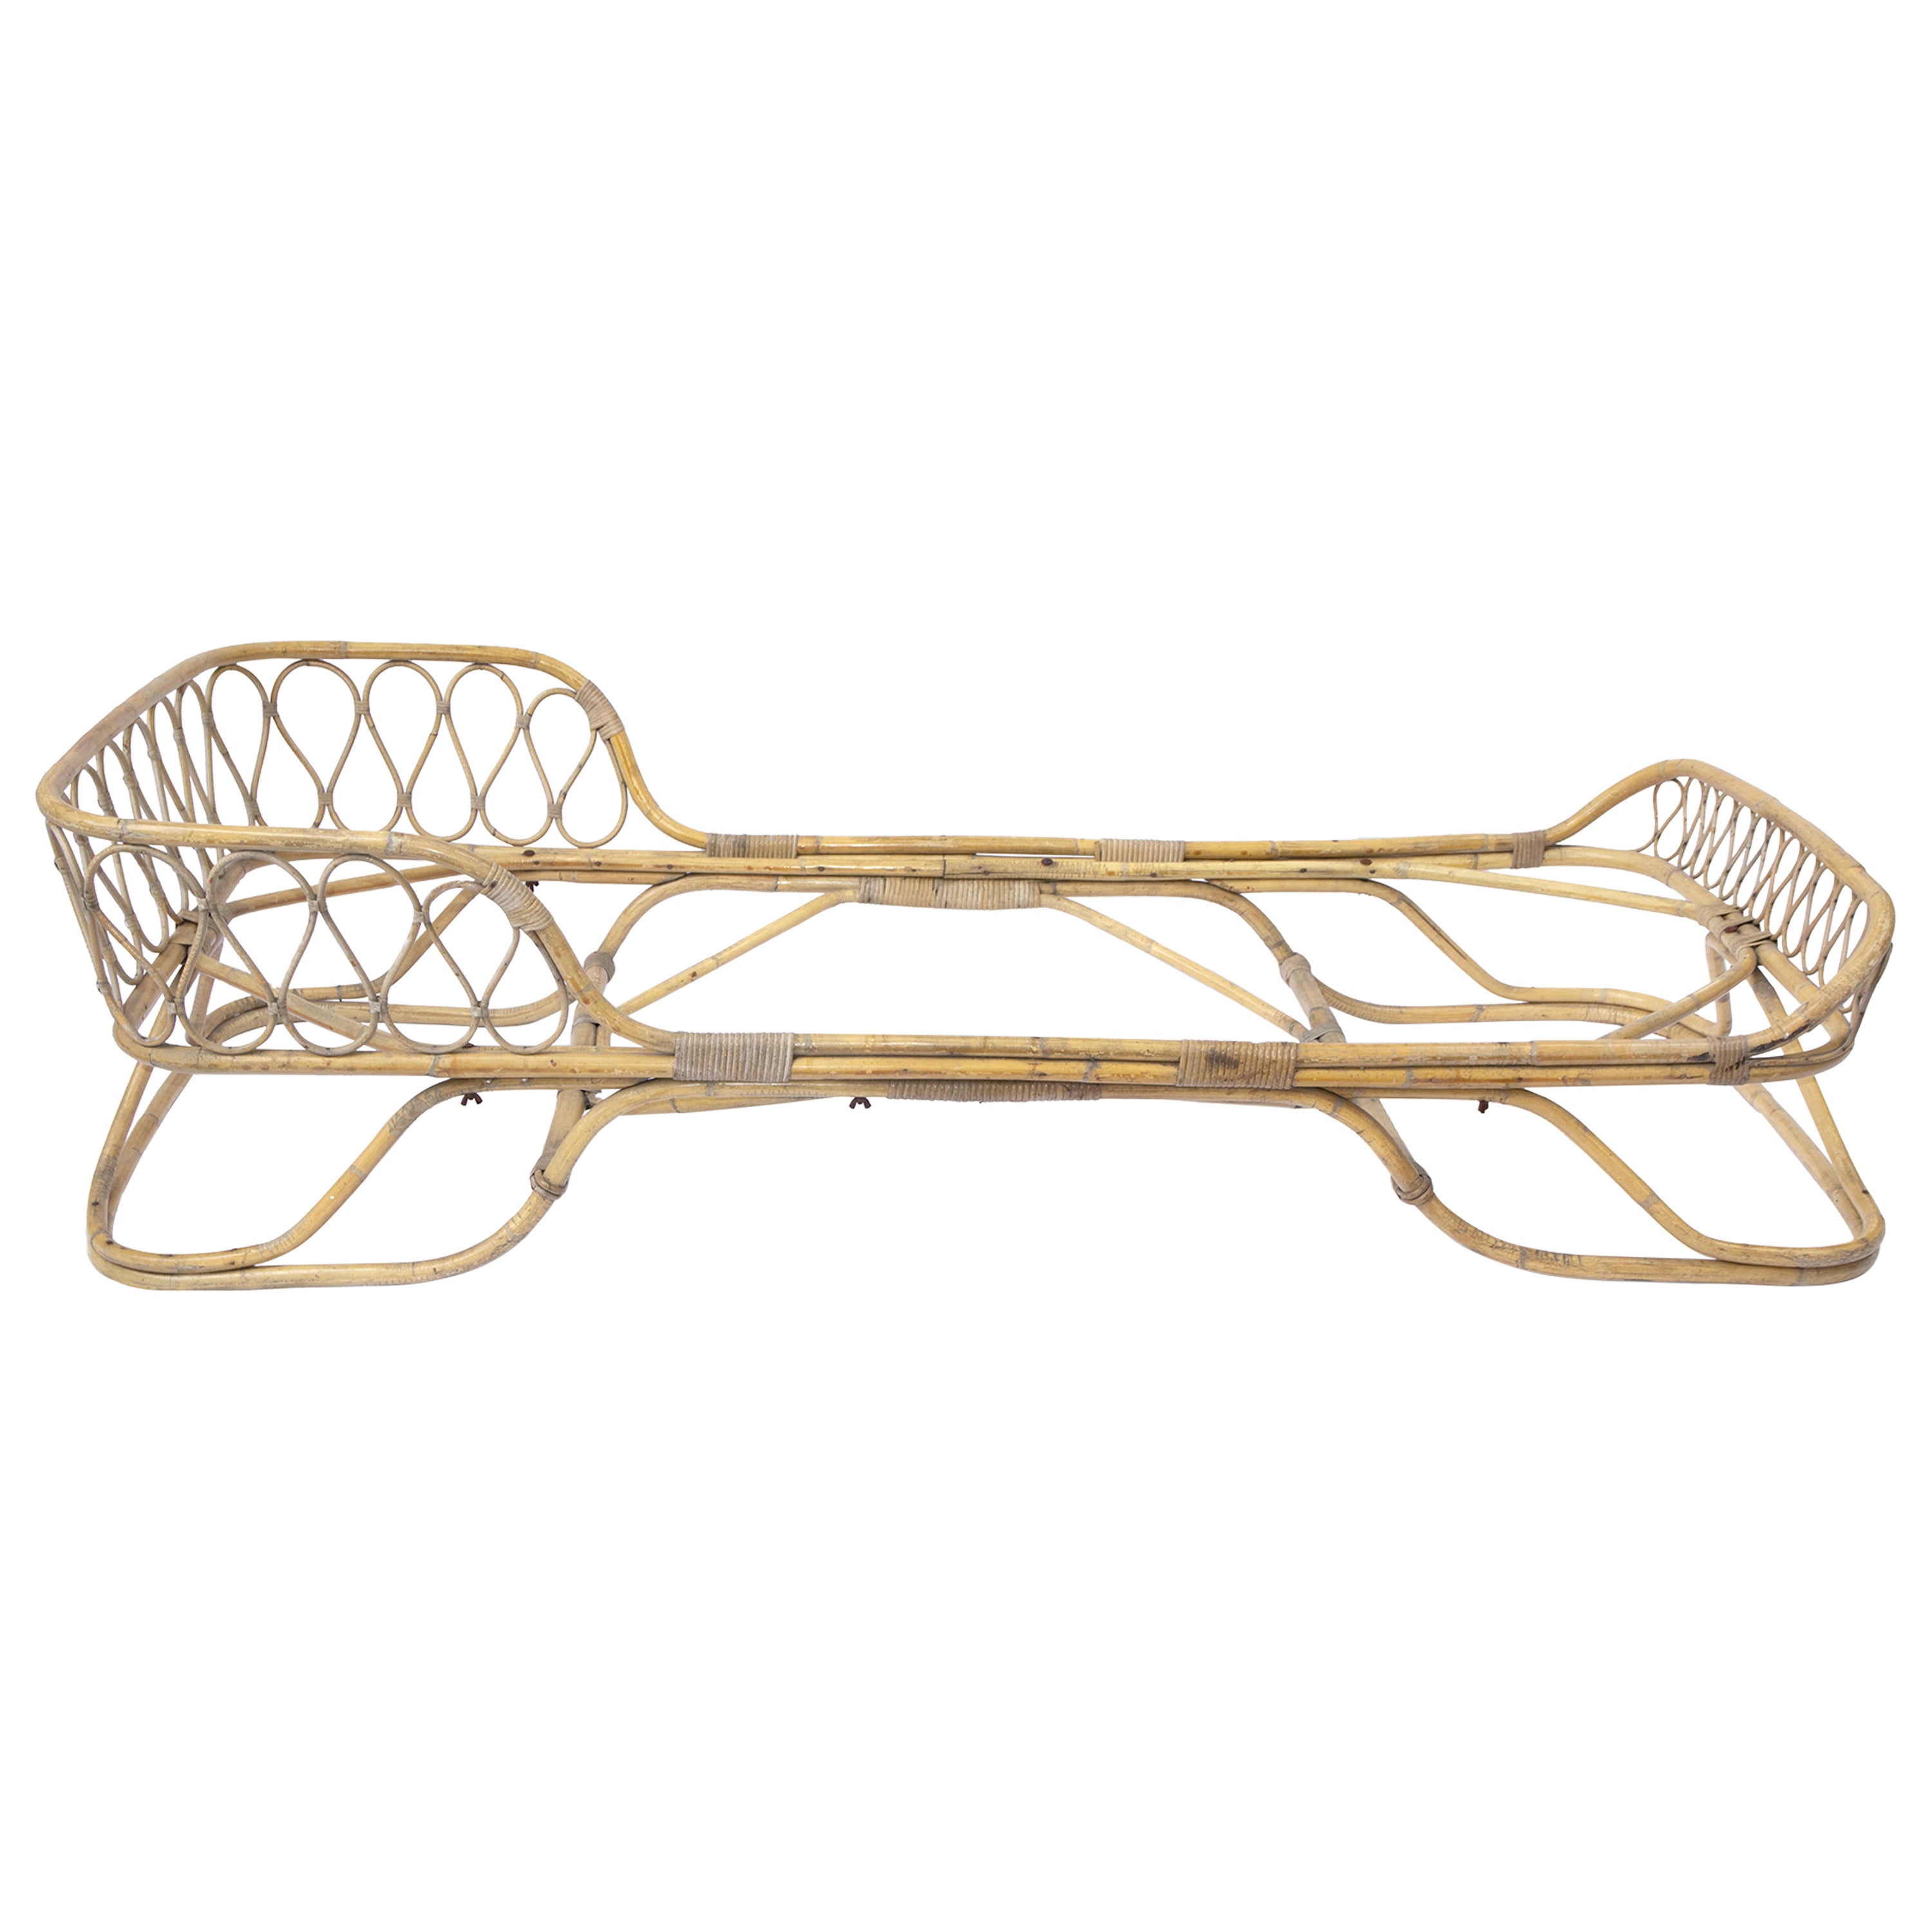 Rattan single bed attributed to Gio Ponti in Bamboo and Wicker, Italy, 1950s. For Sale